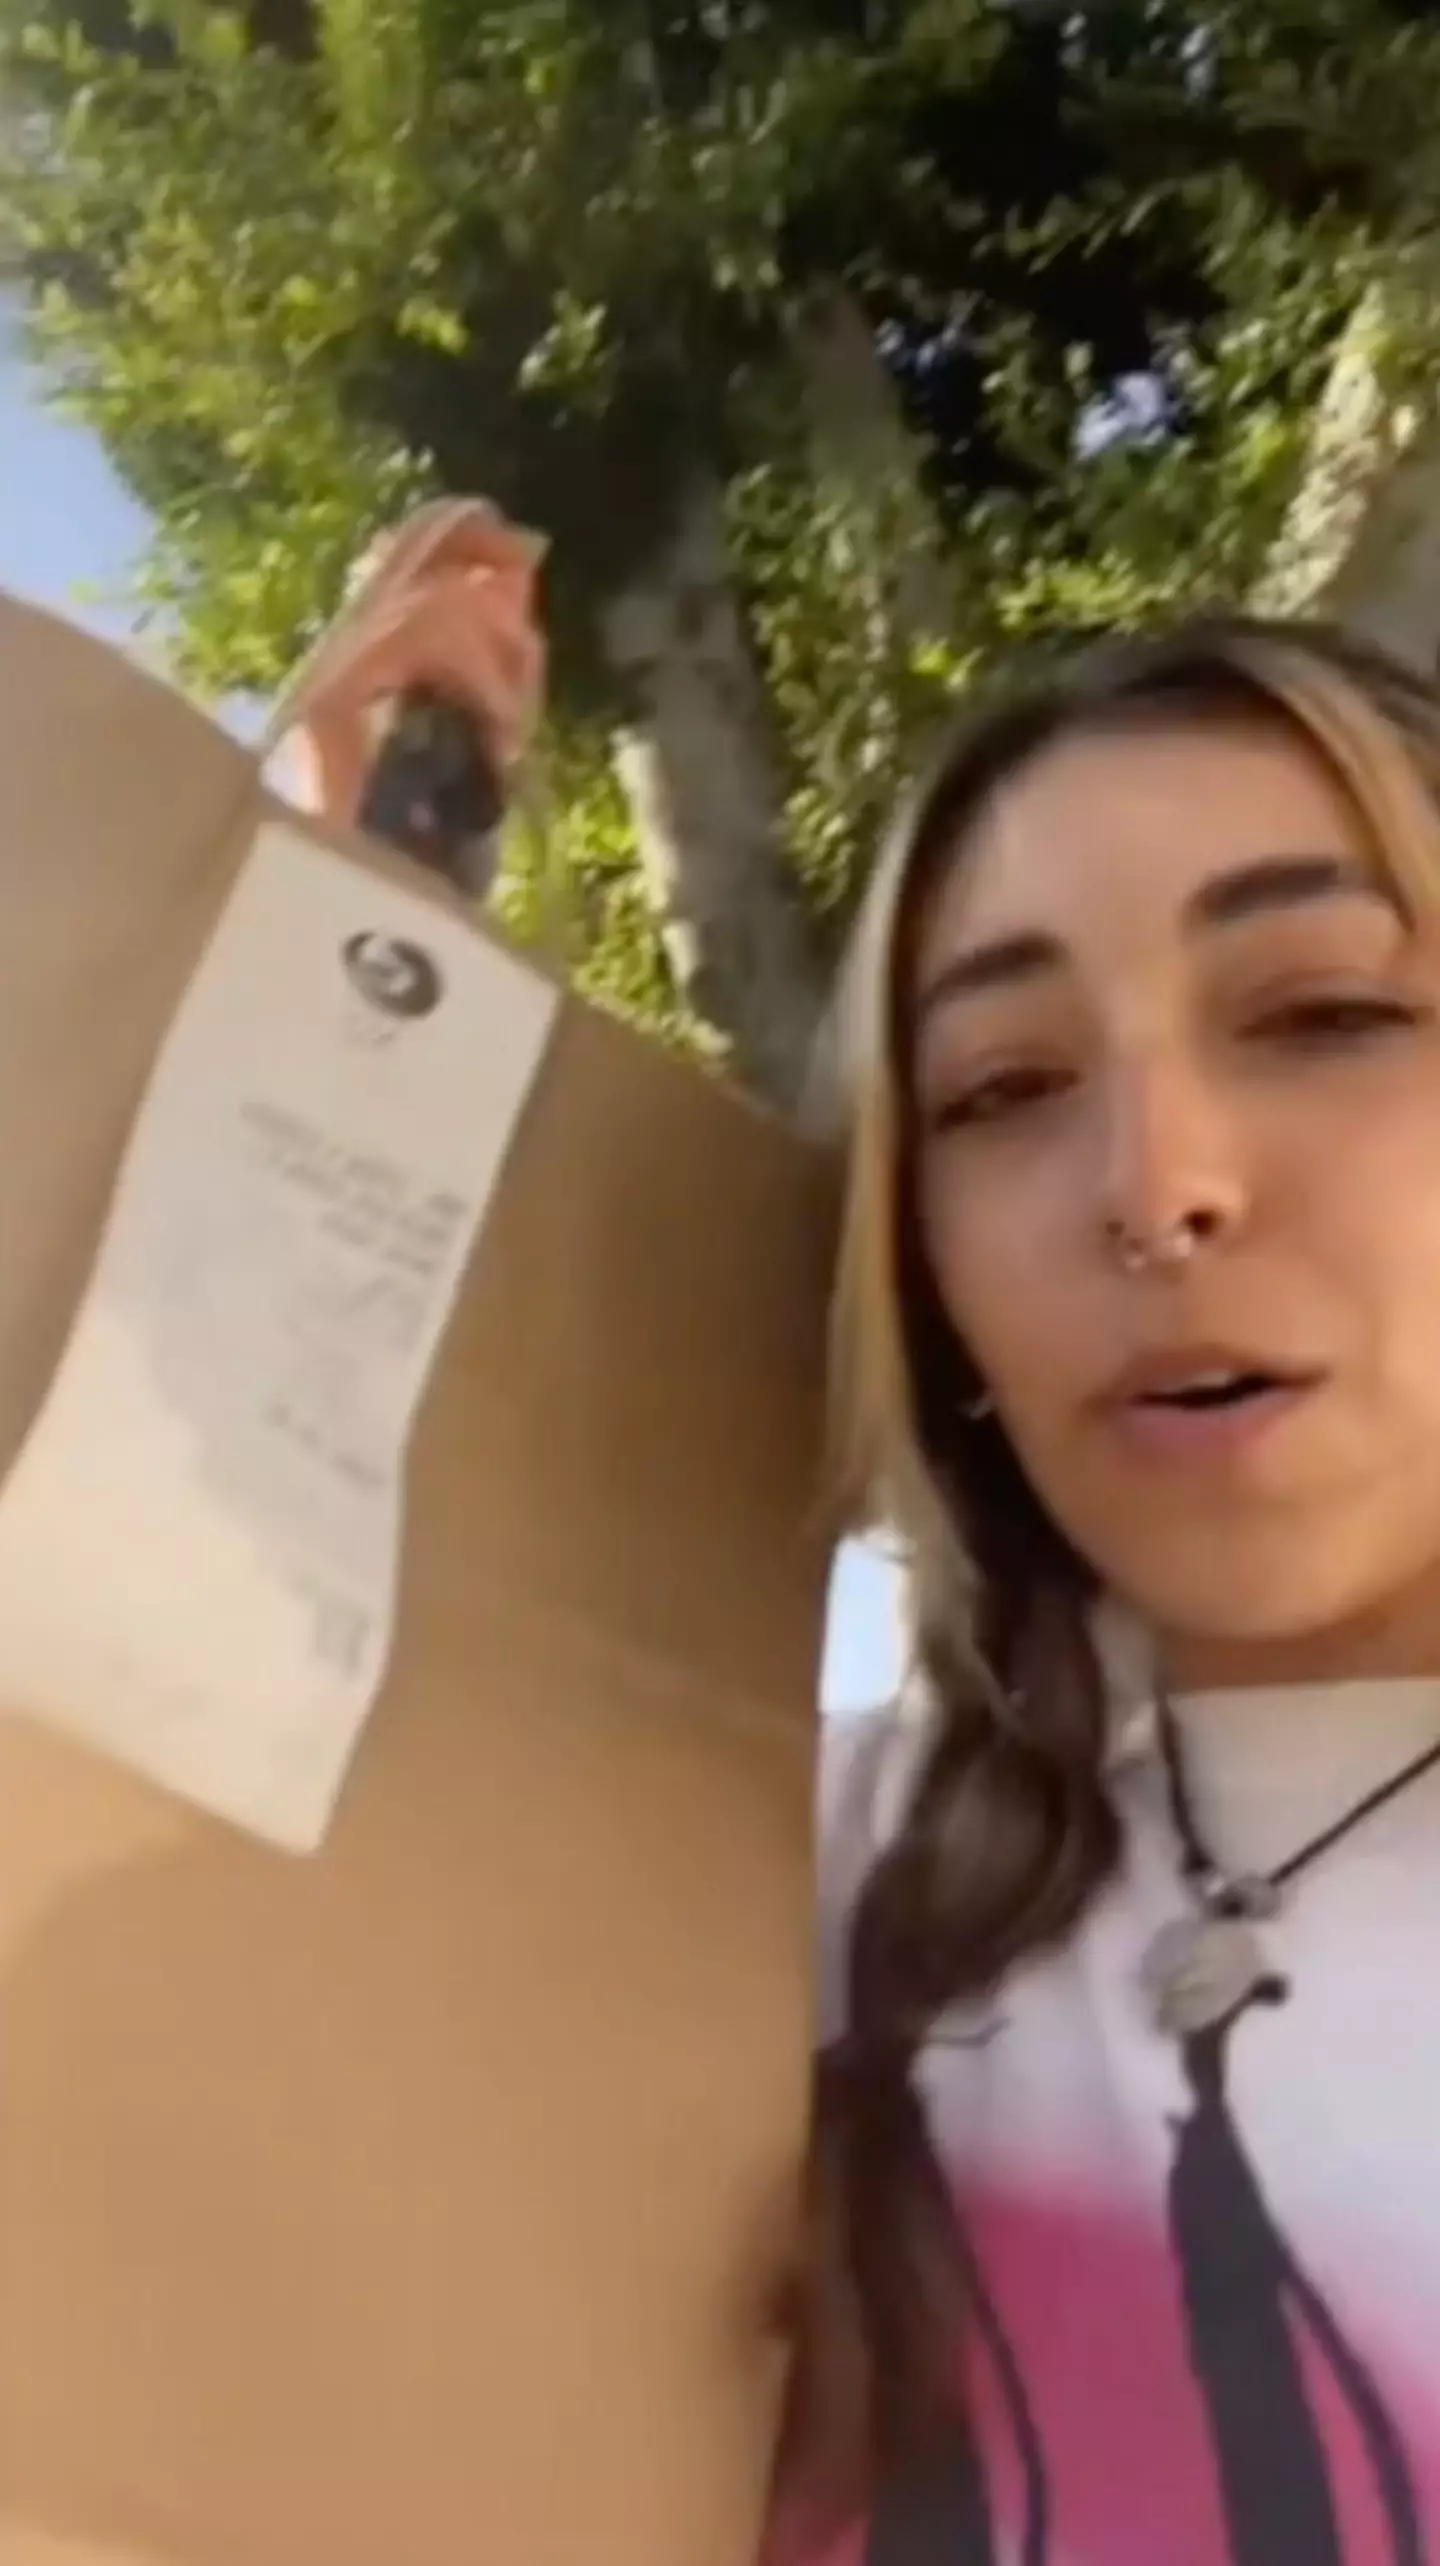 A woman has given us an insight into what it's like being a DoorDash driver.